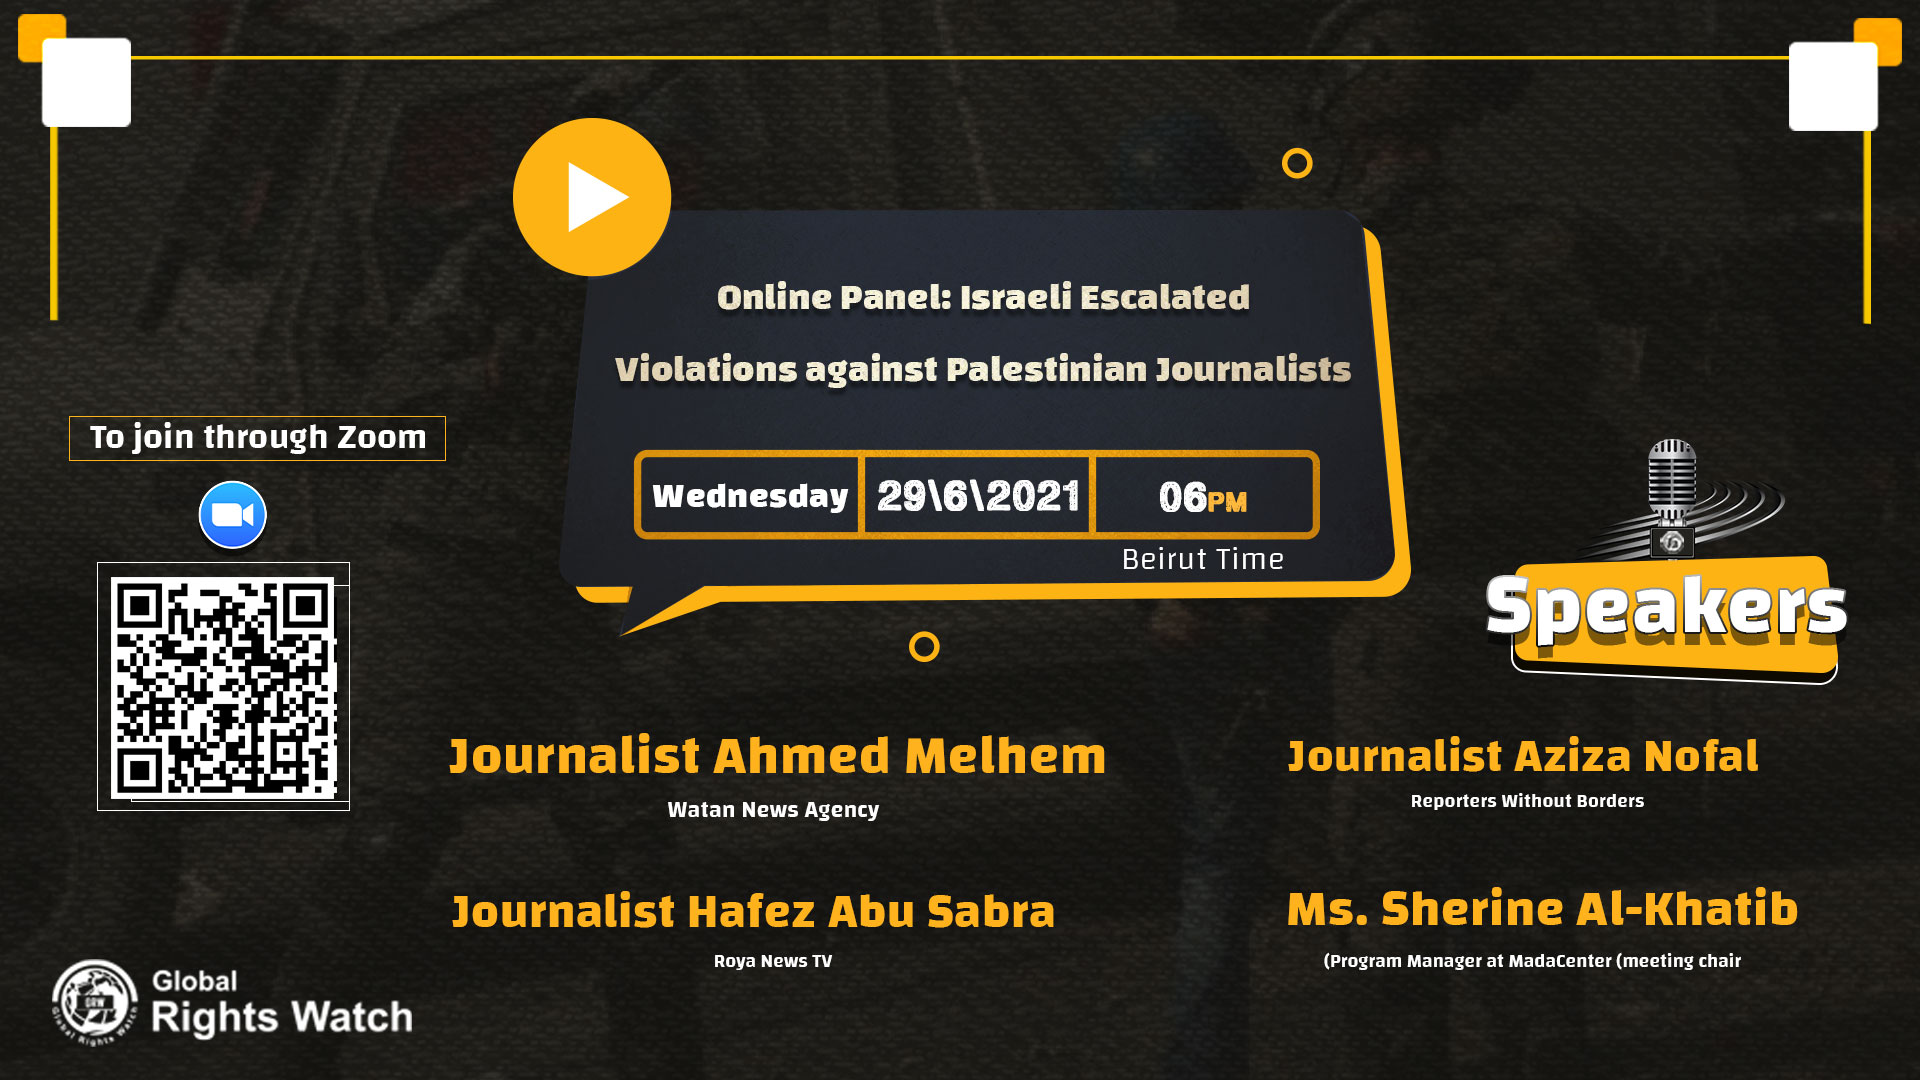 Online Panel: Israeli Escalated Violations against Palestinian Journalists